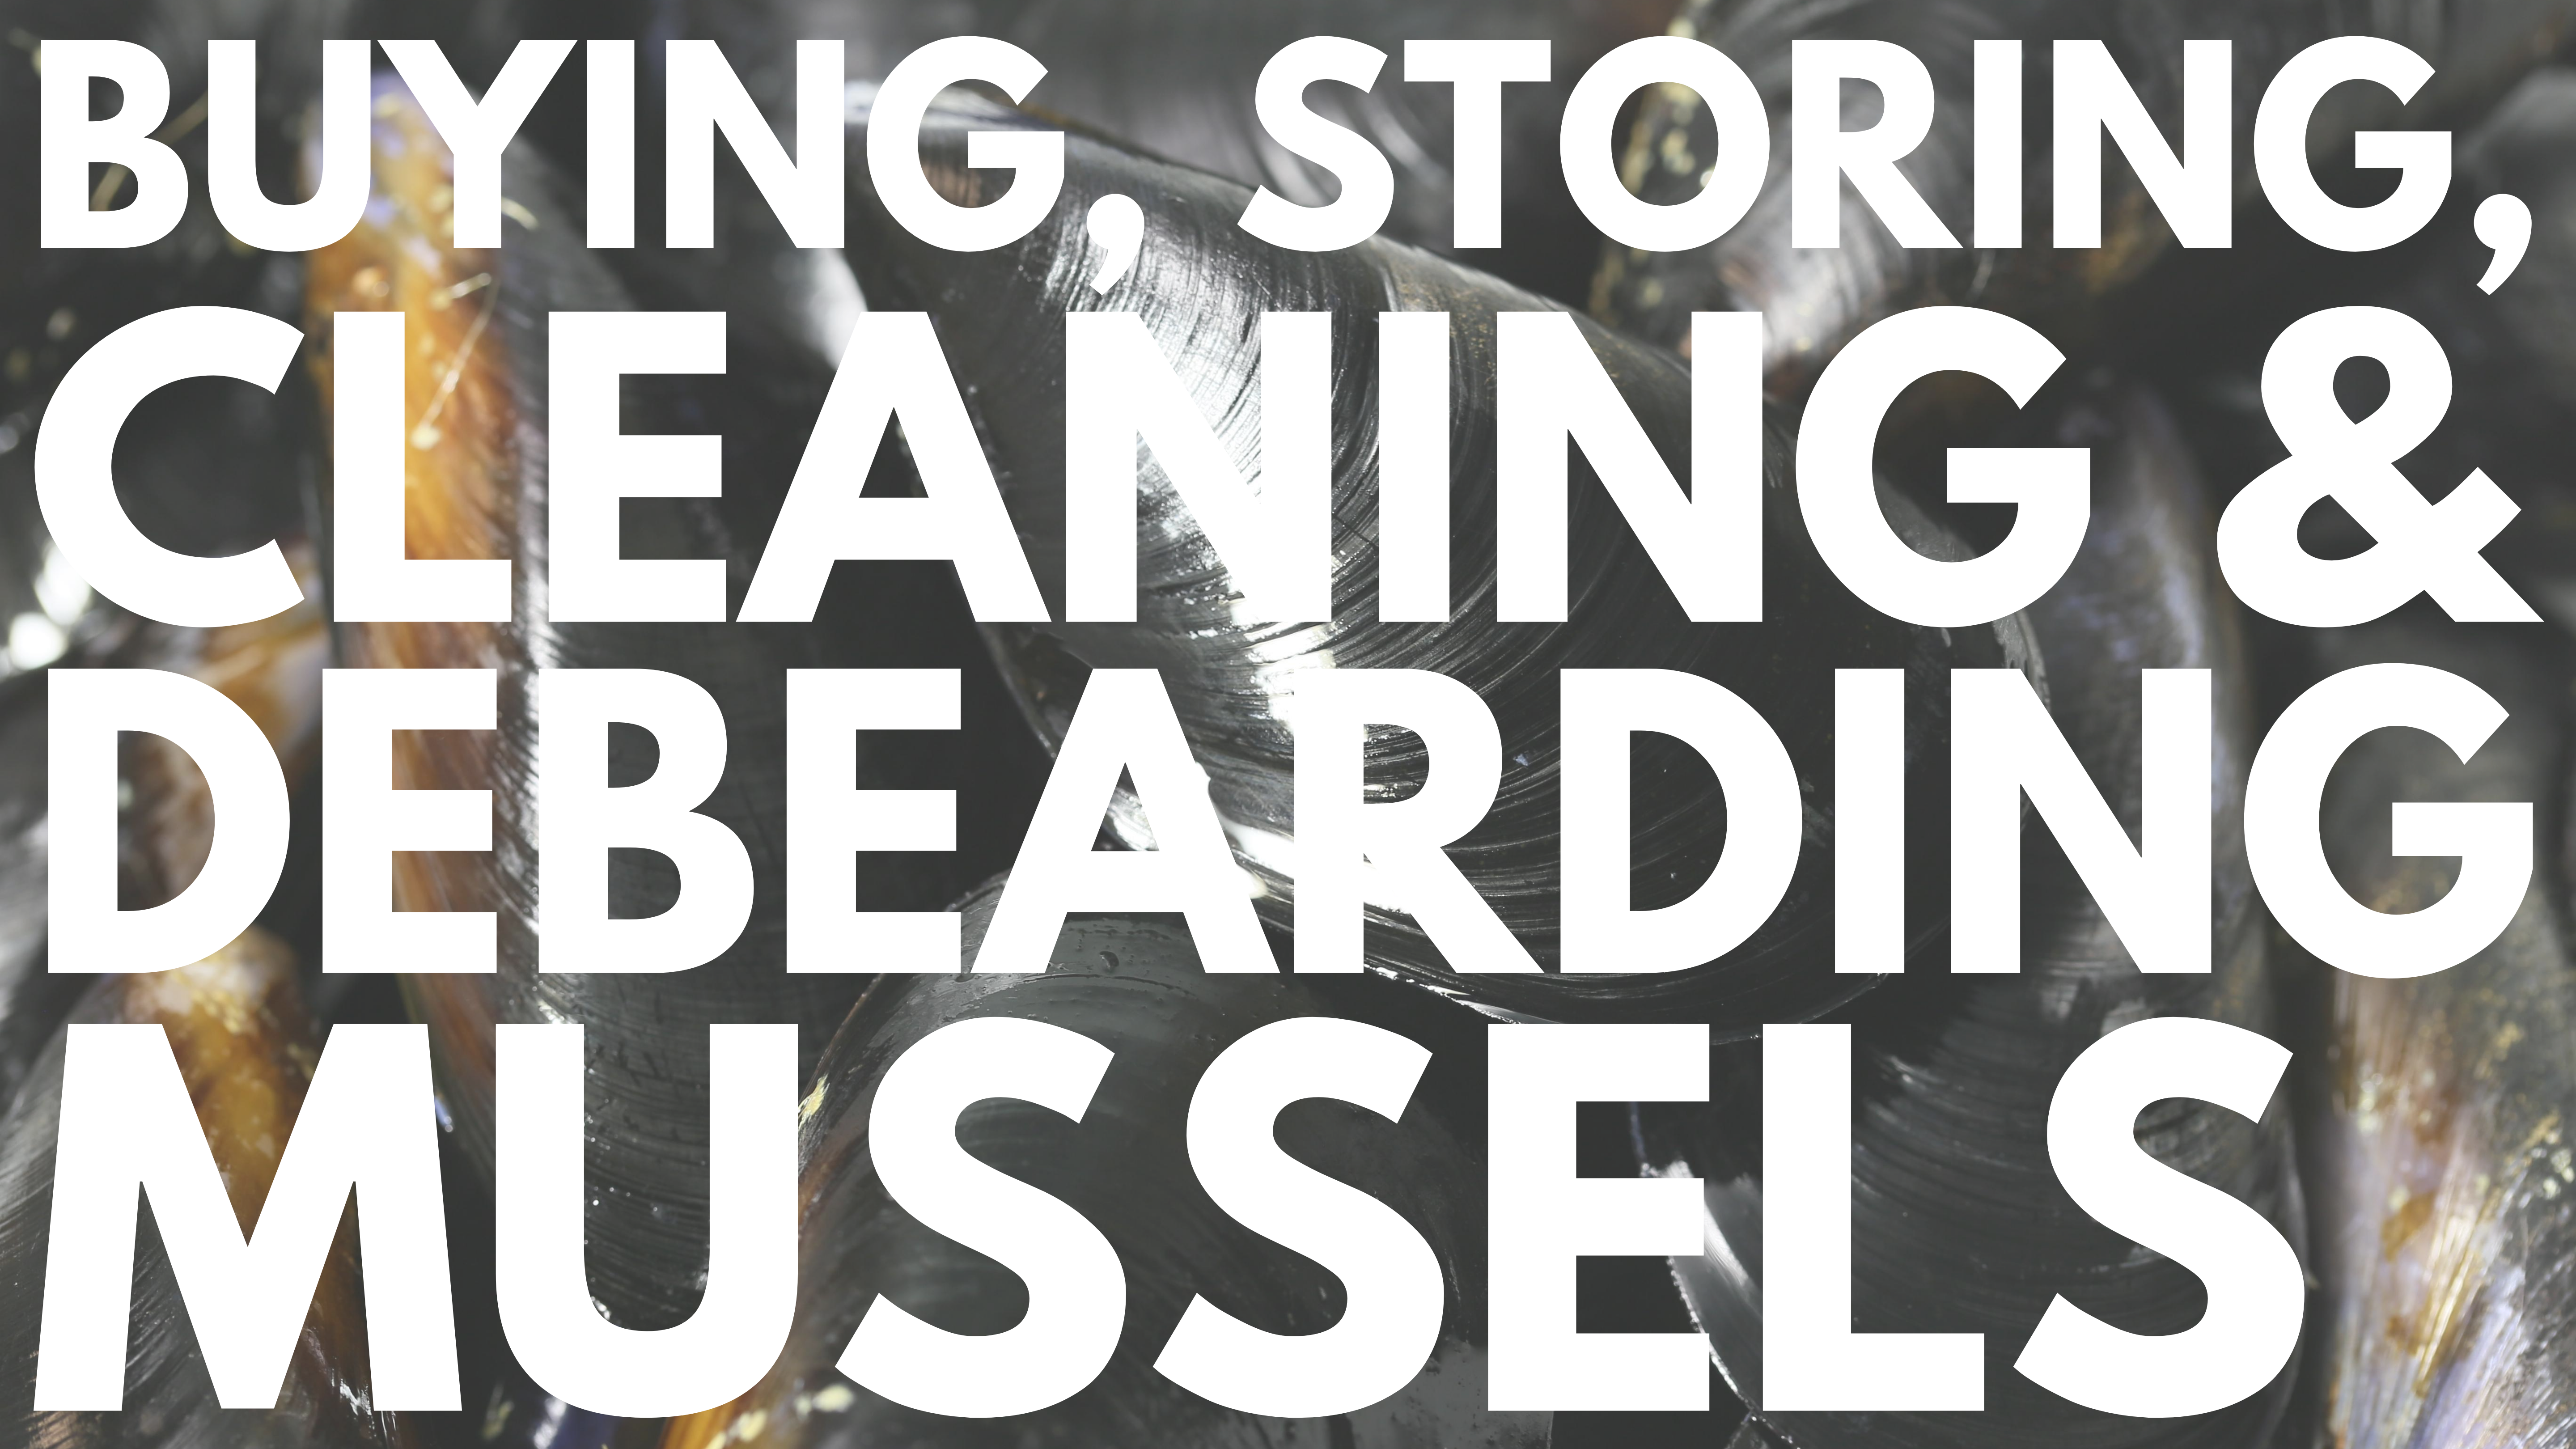 Buying, Storing, Cleaning and Debearding Mussels